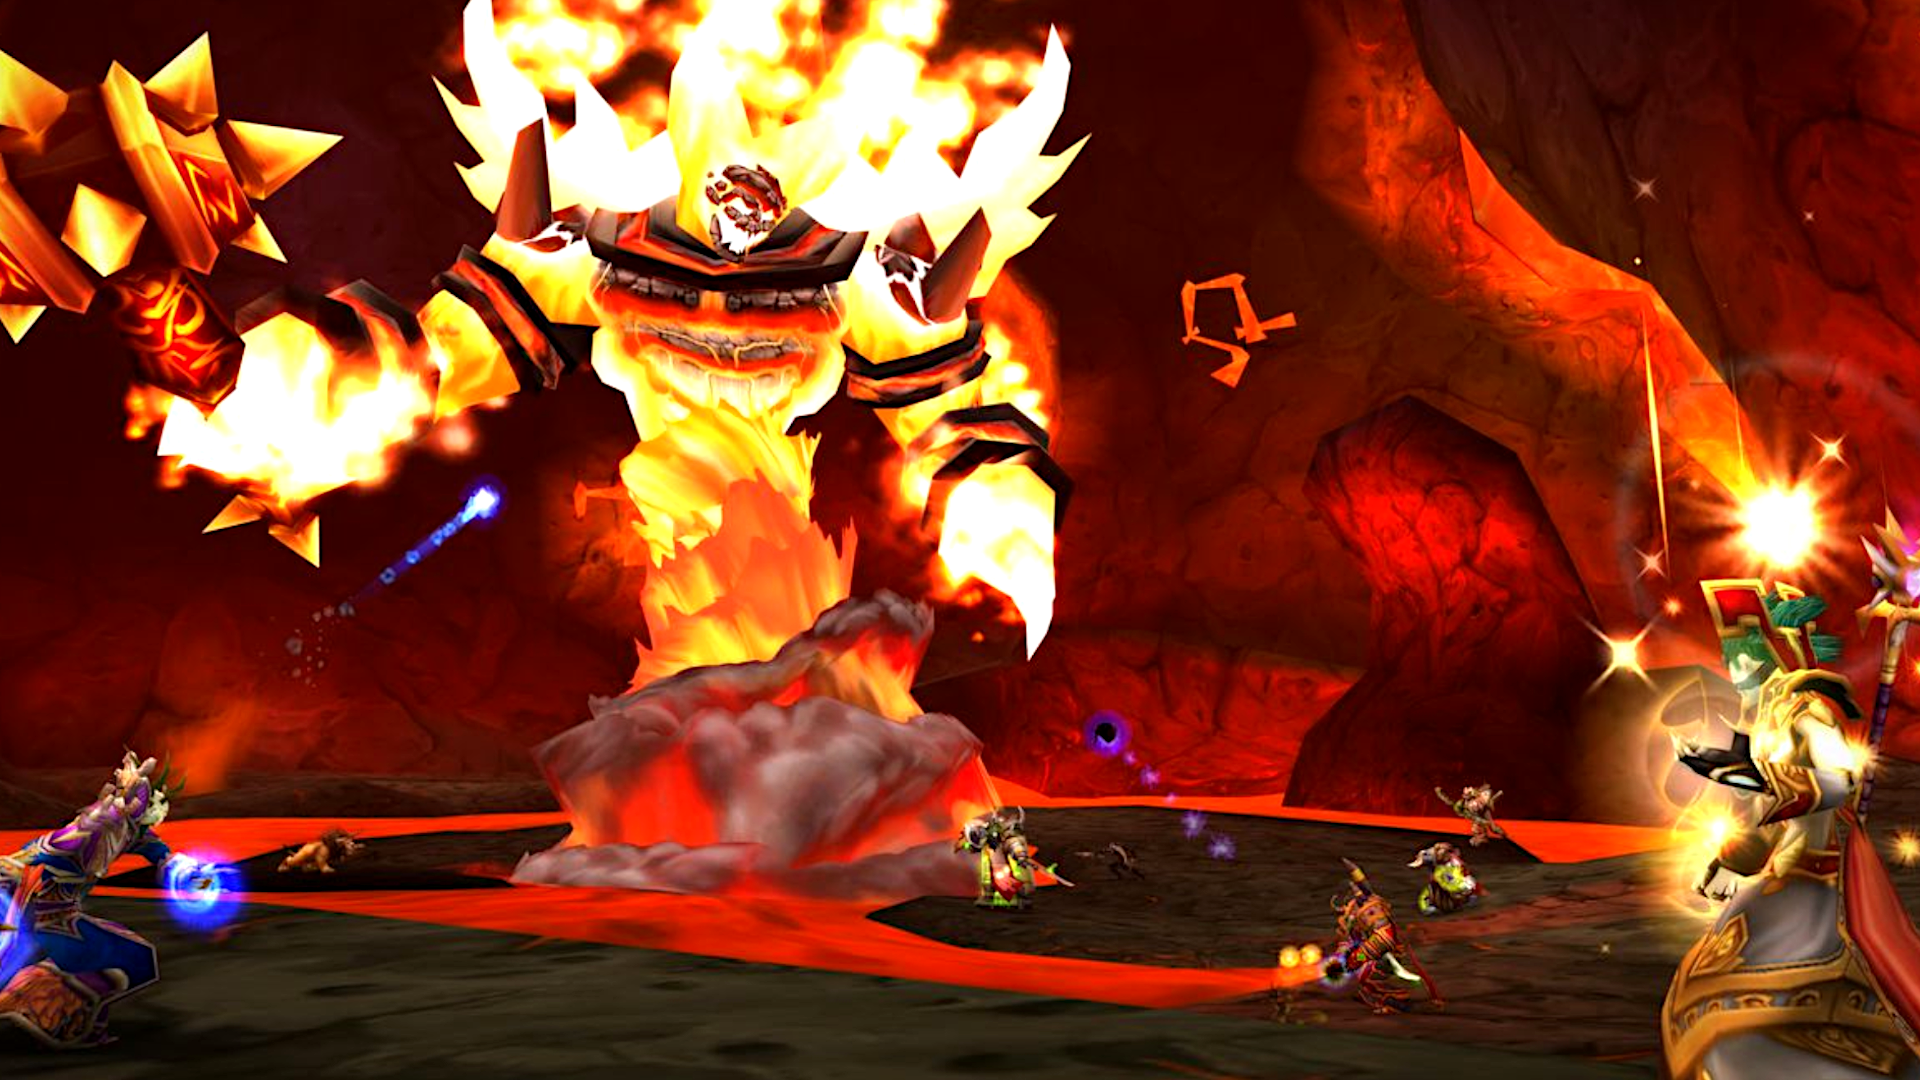 Ragnaros the fire lord, a towering elemental of flame, does battle with players in World of Warcraft Classic.